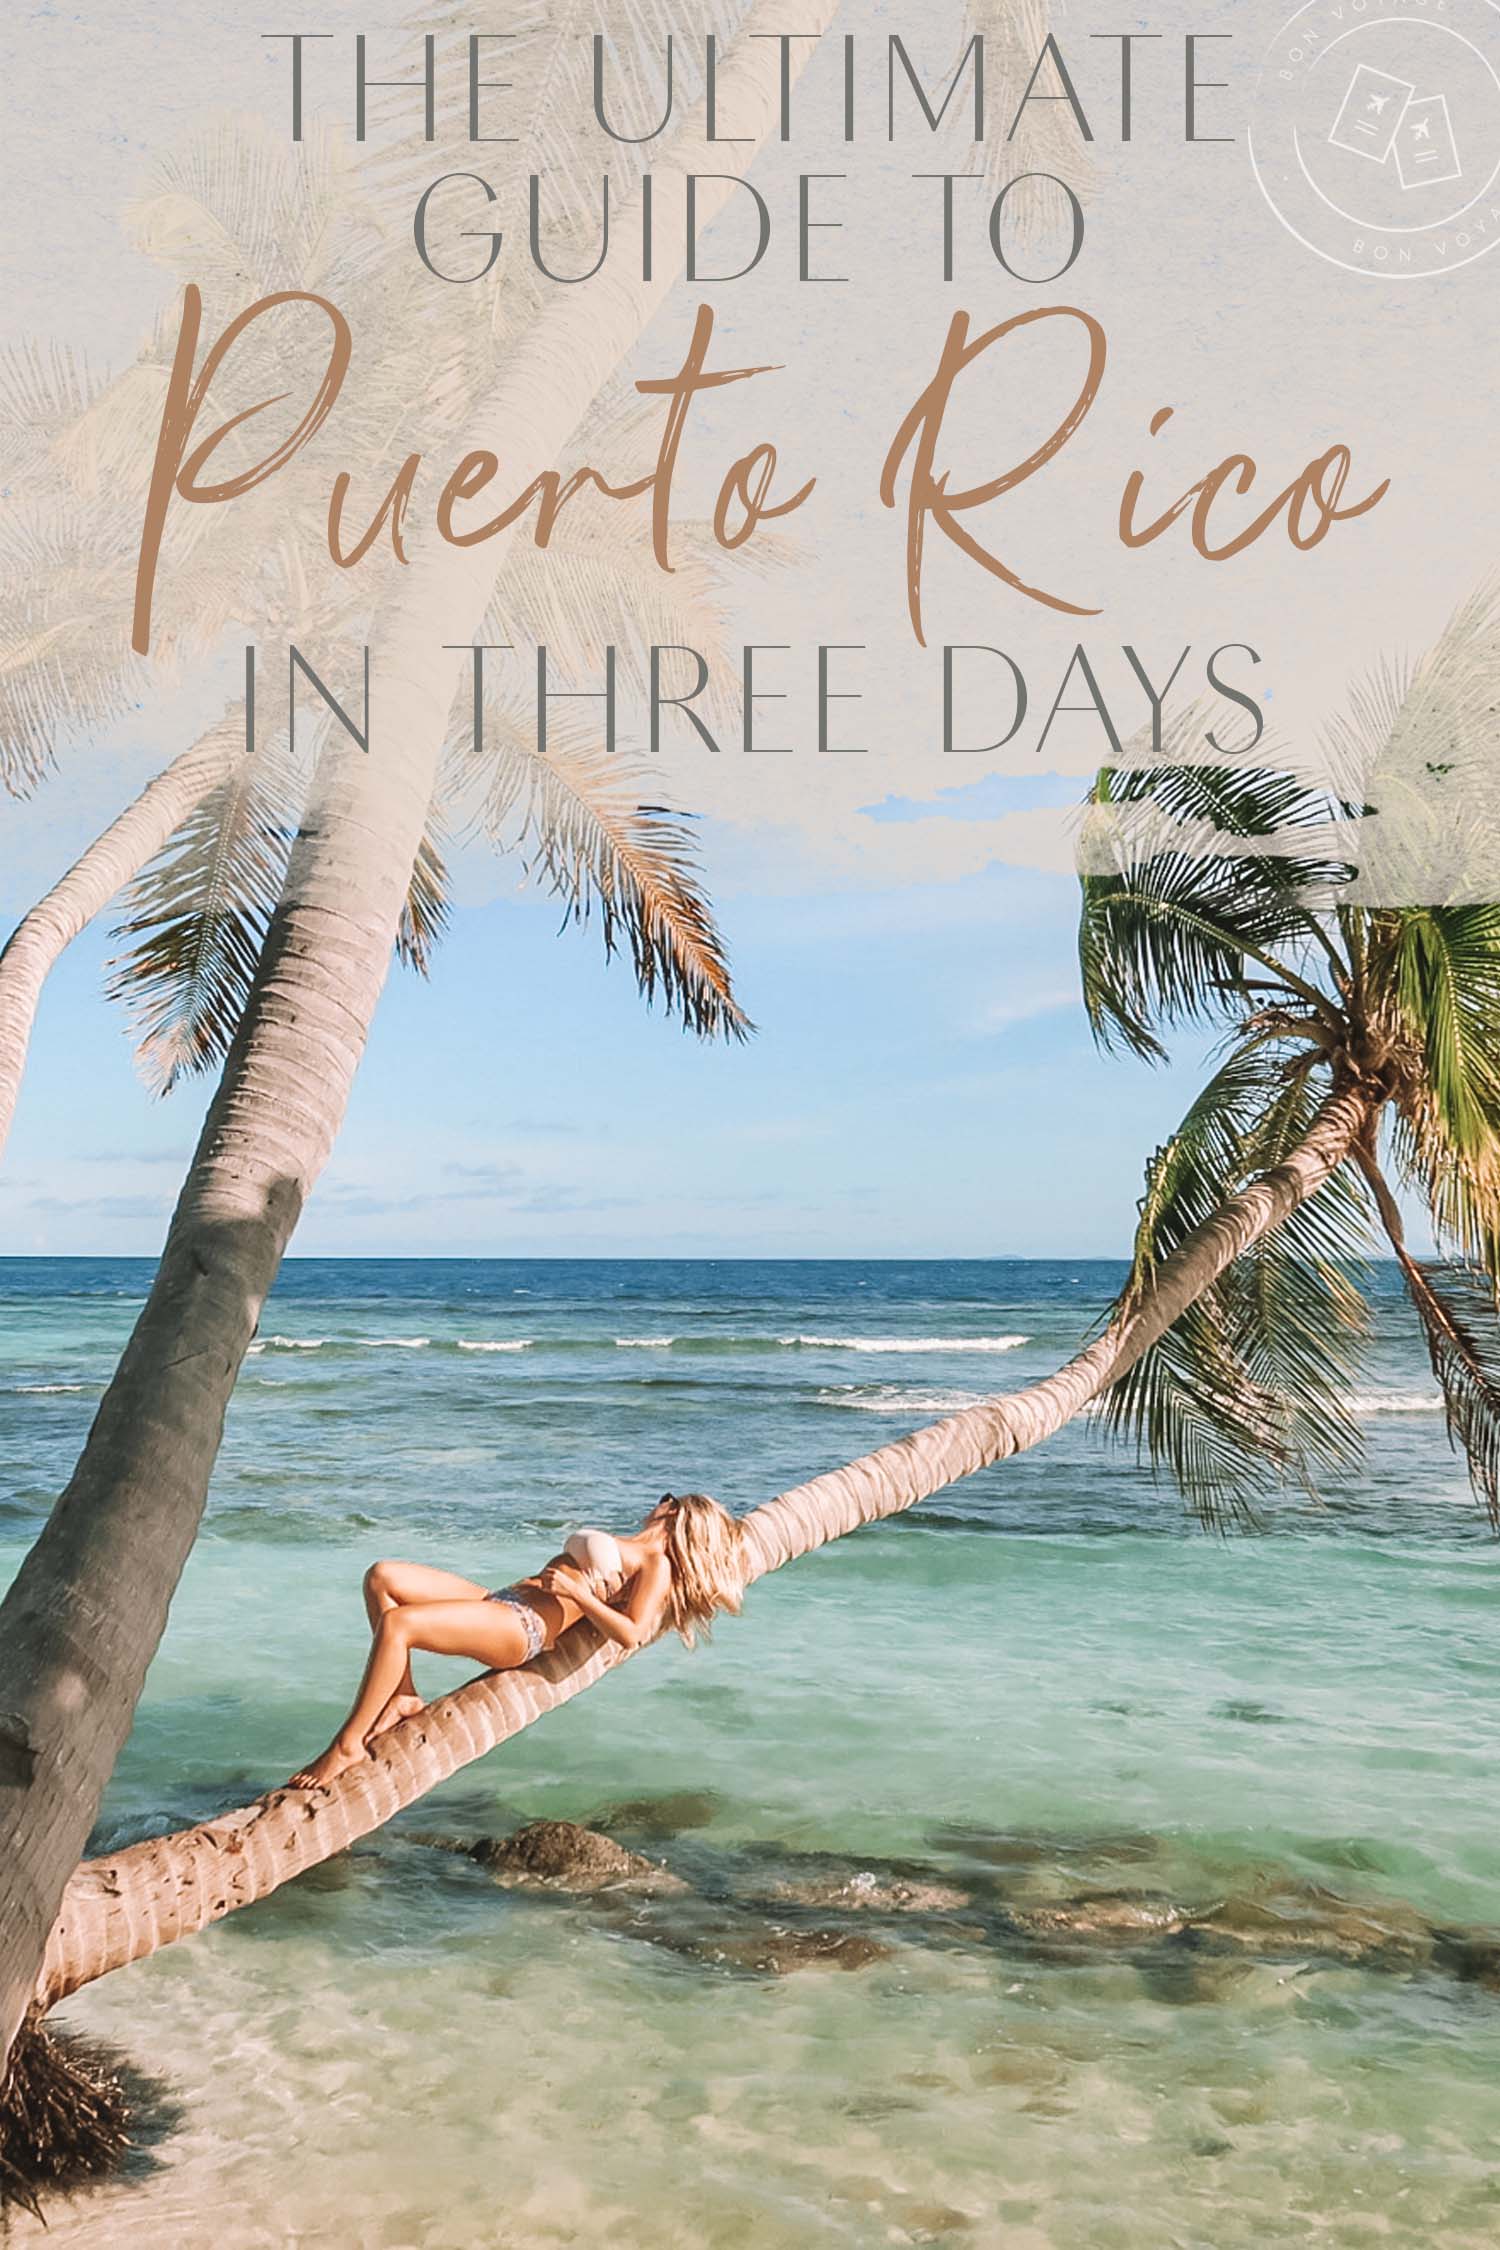 puerto rico travel for us citizens